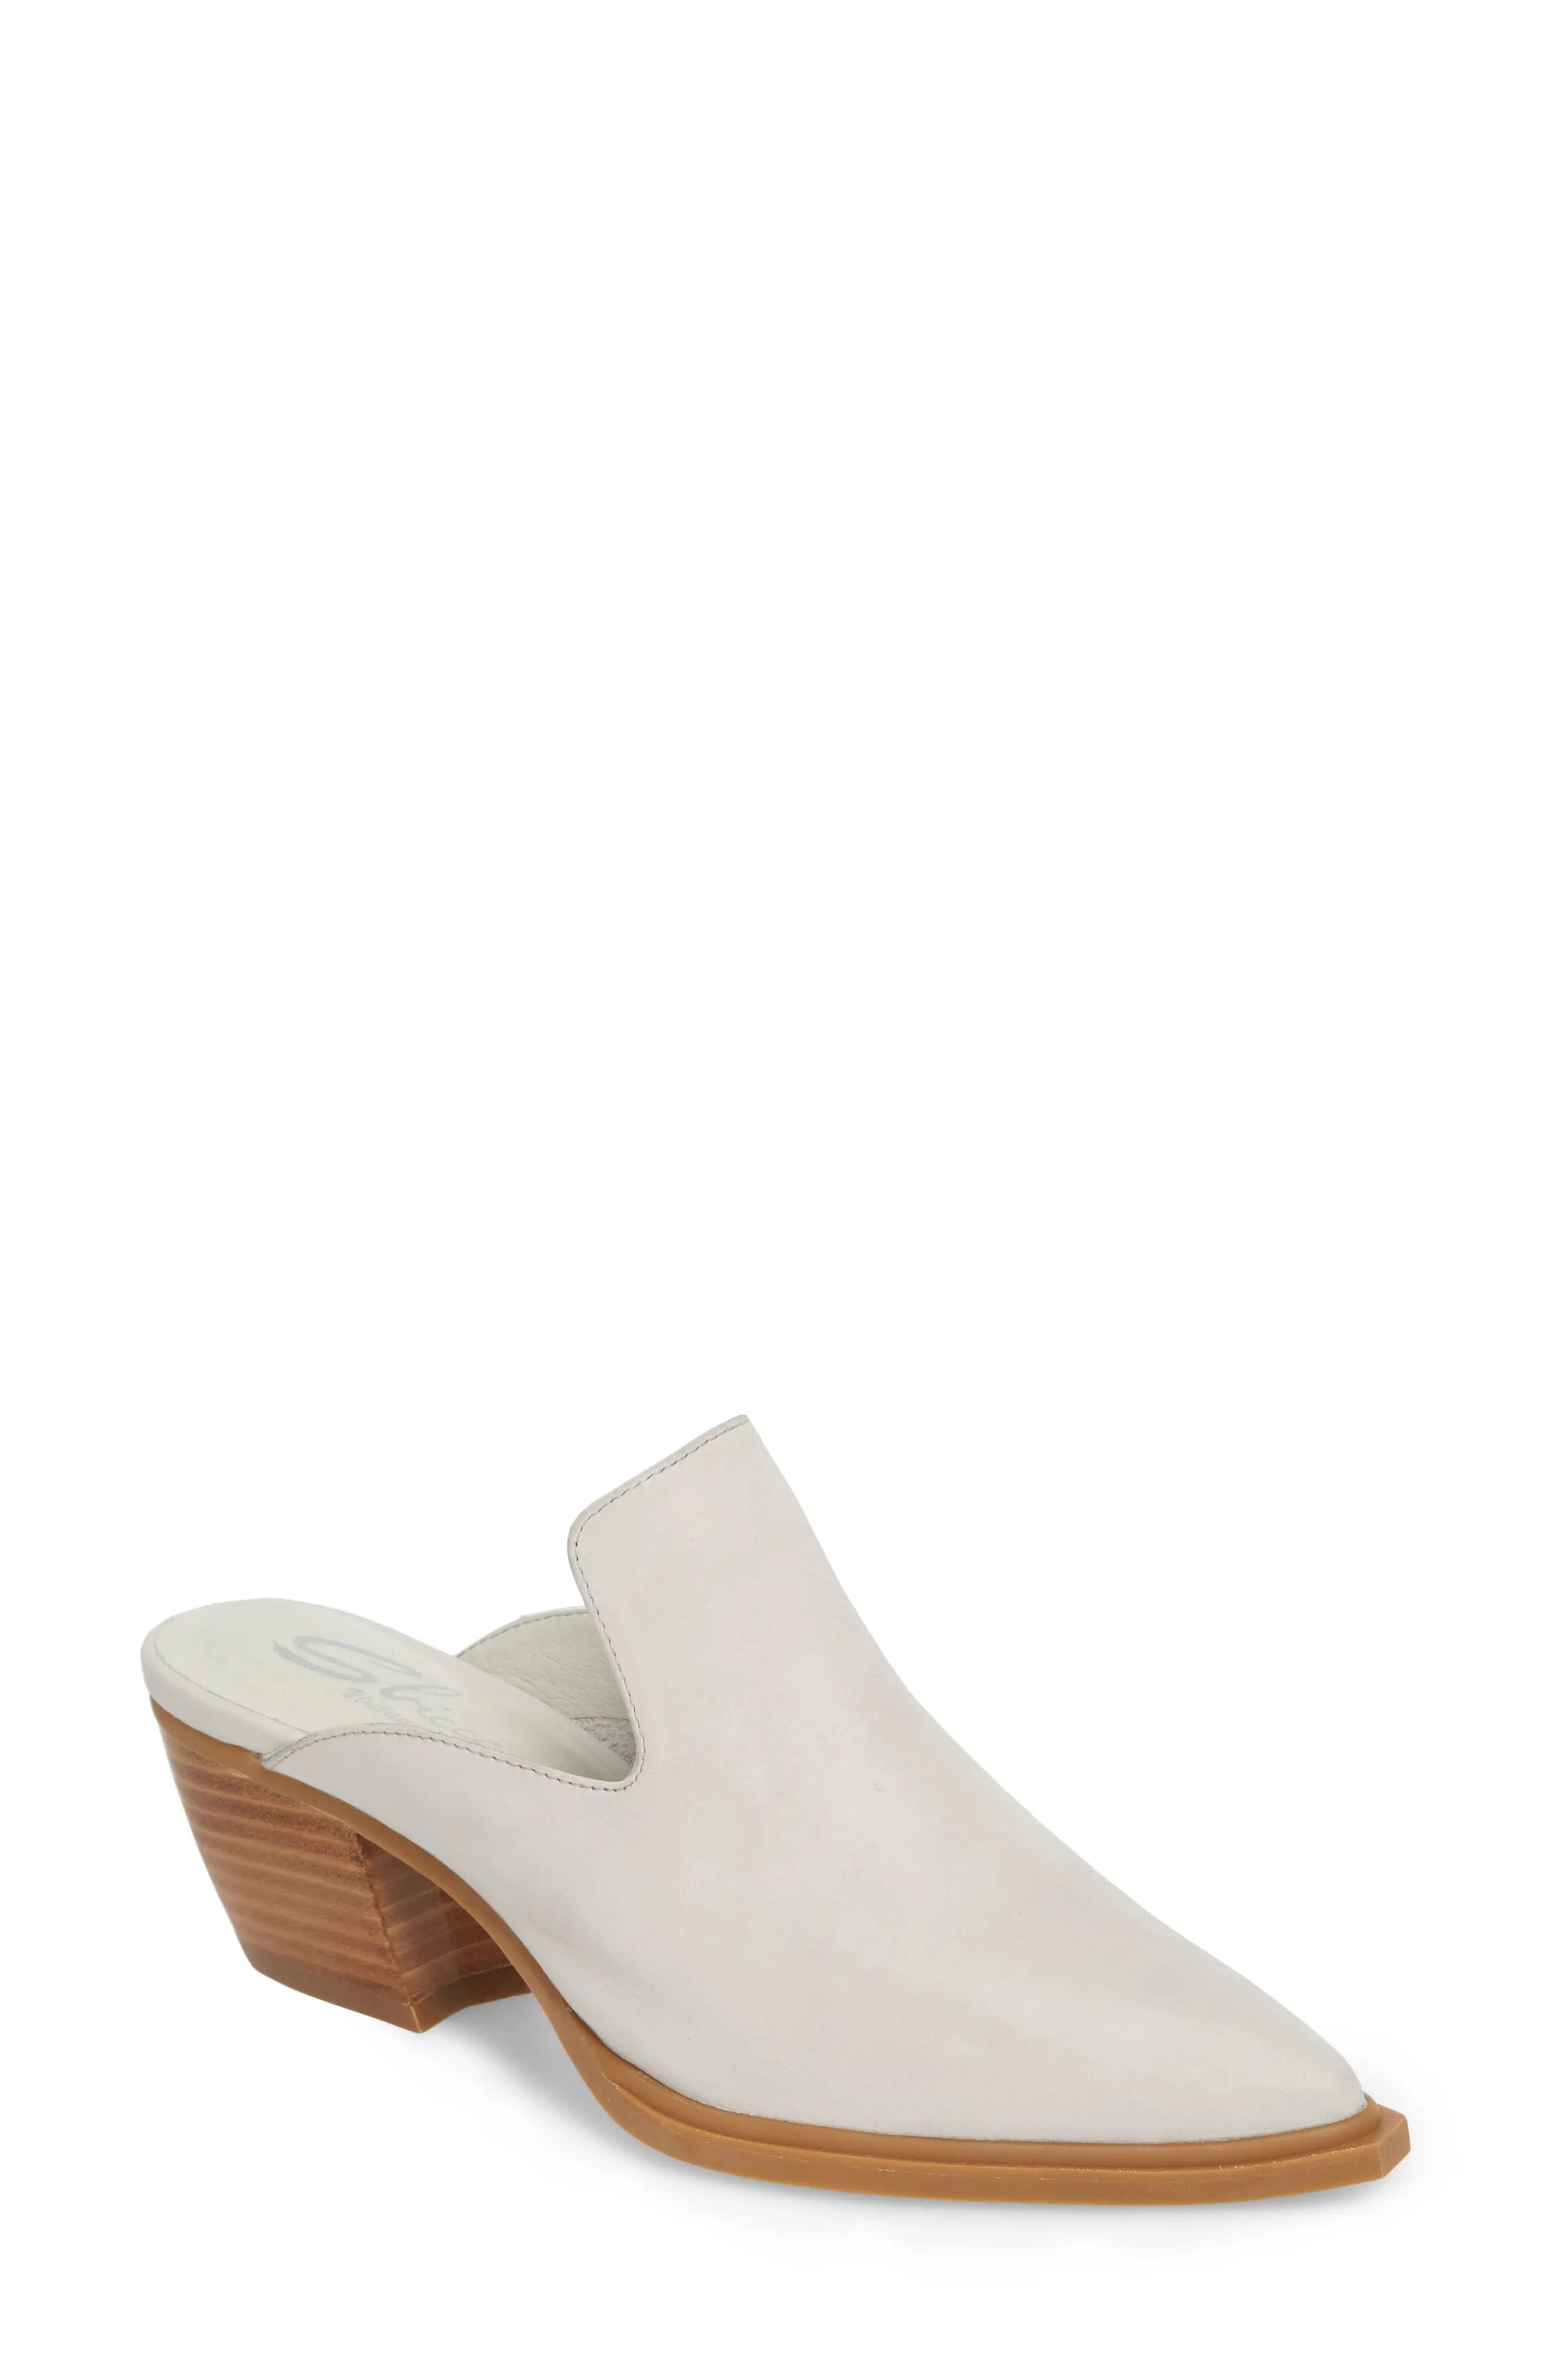 Women's Sbicca Louisa Loafer Mule, Size 6 M - White | Nordstrom